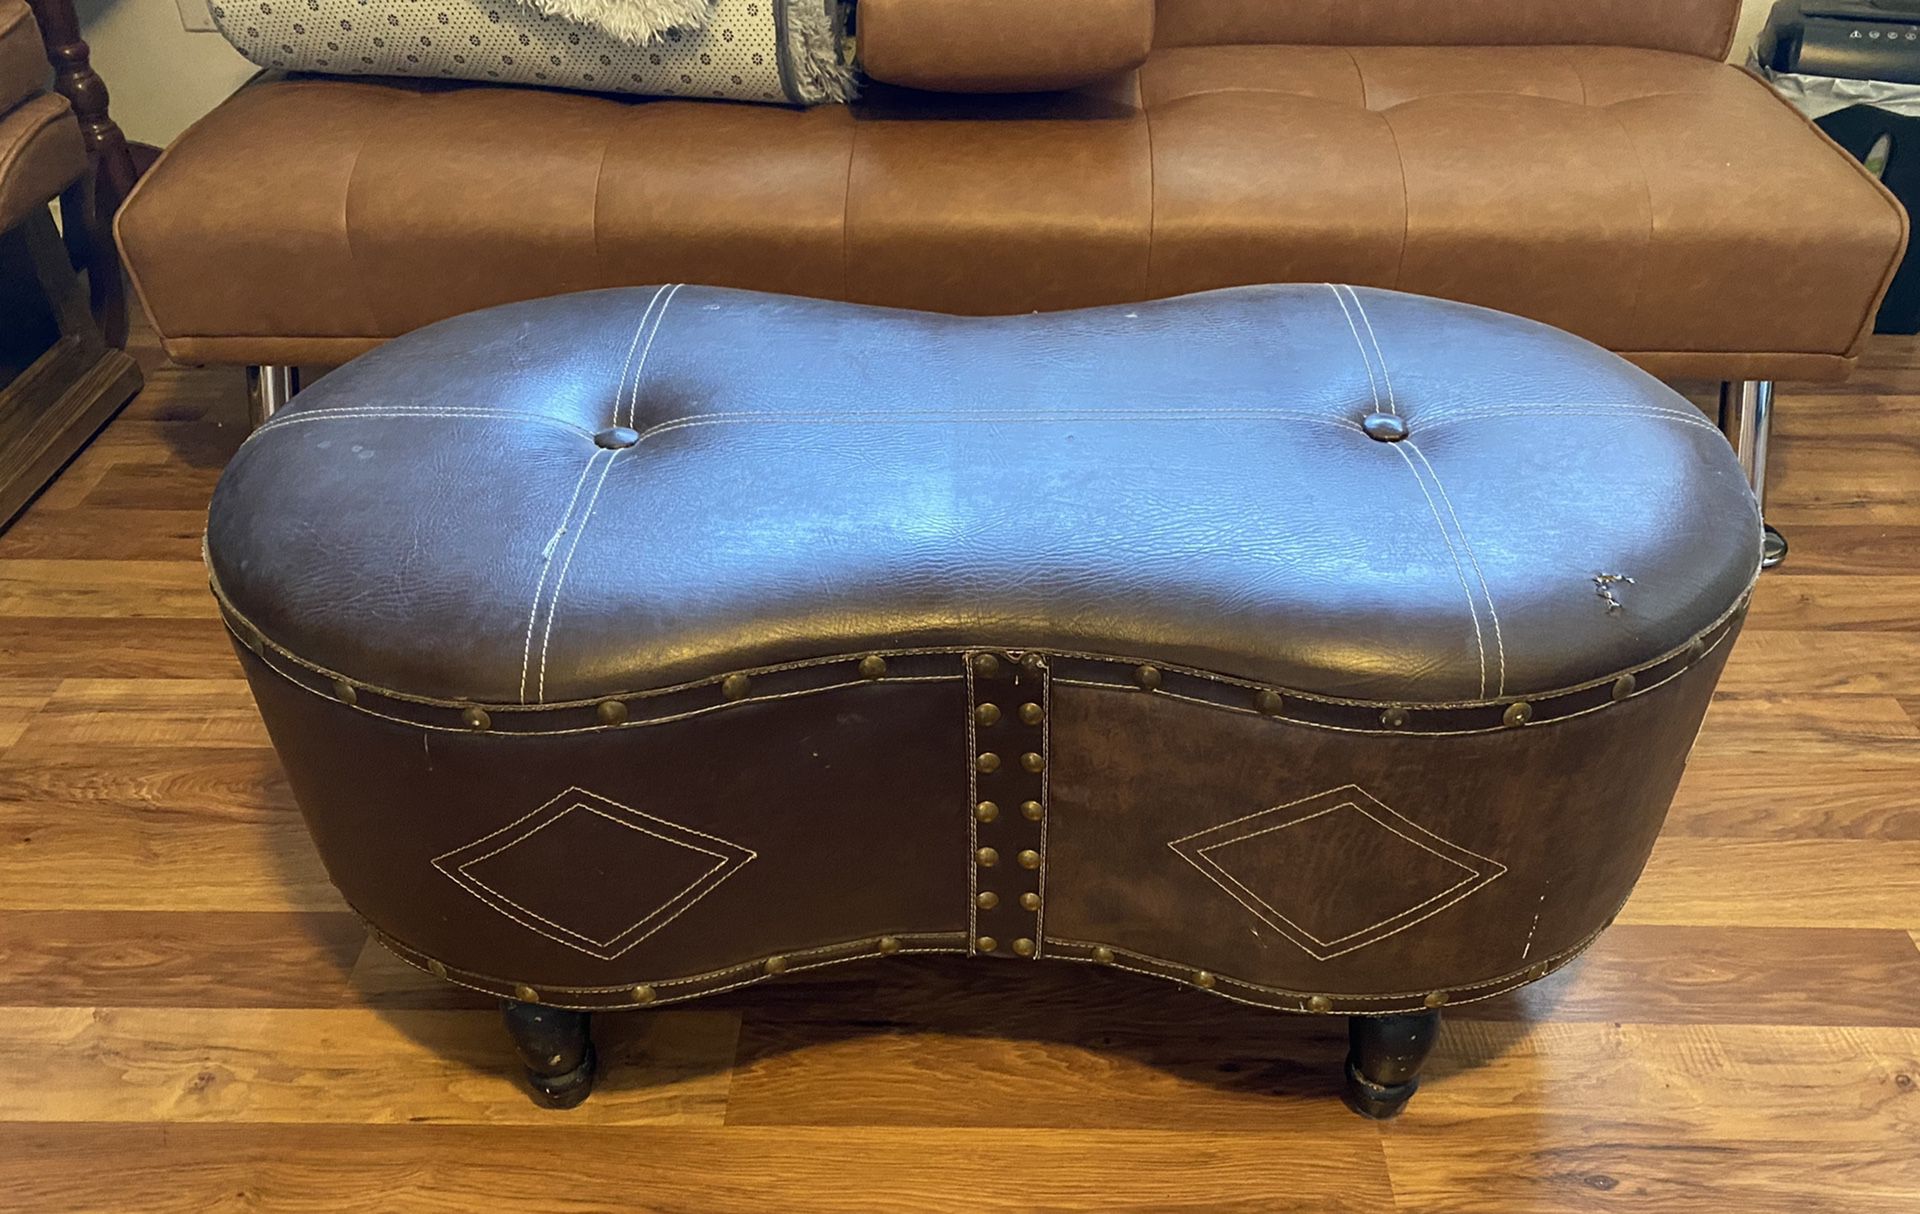 Used ottoman/chair Does not have storage $20